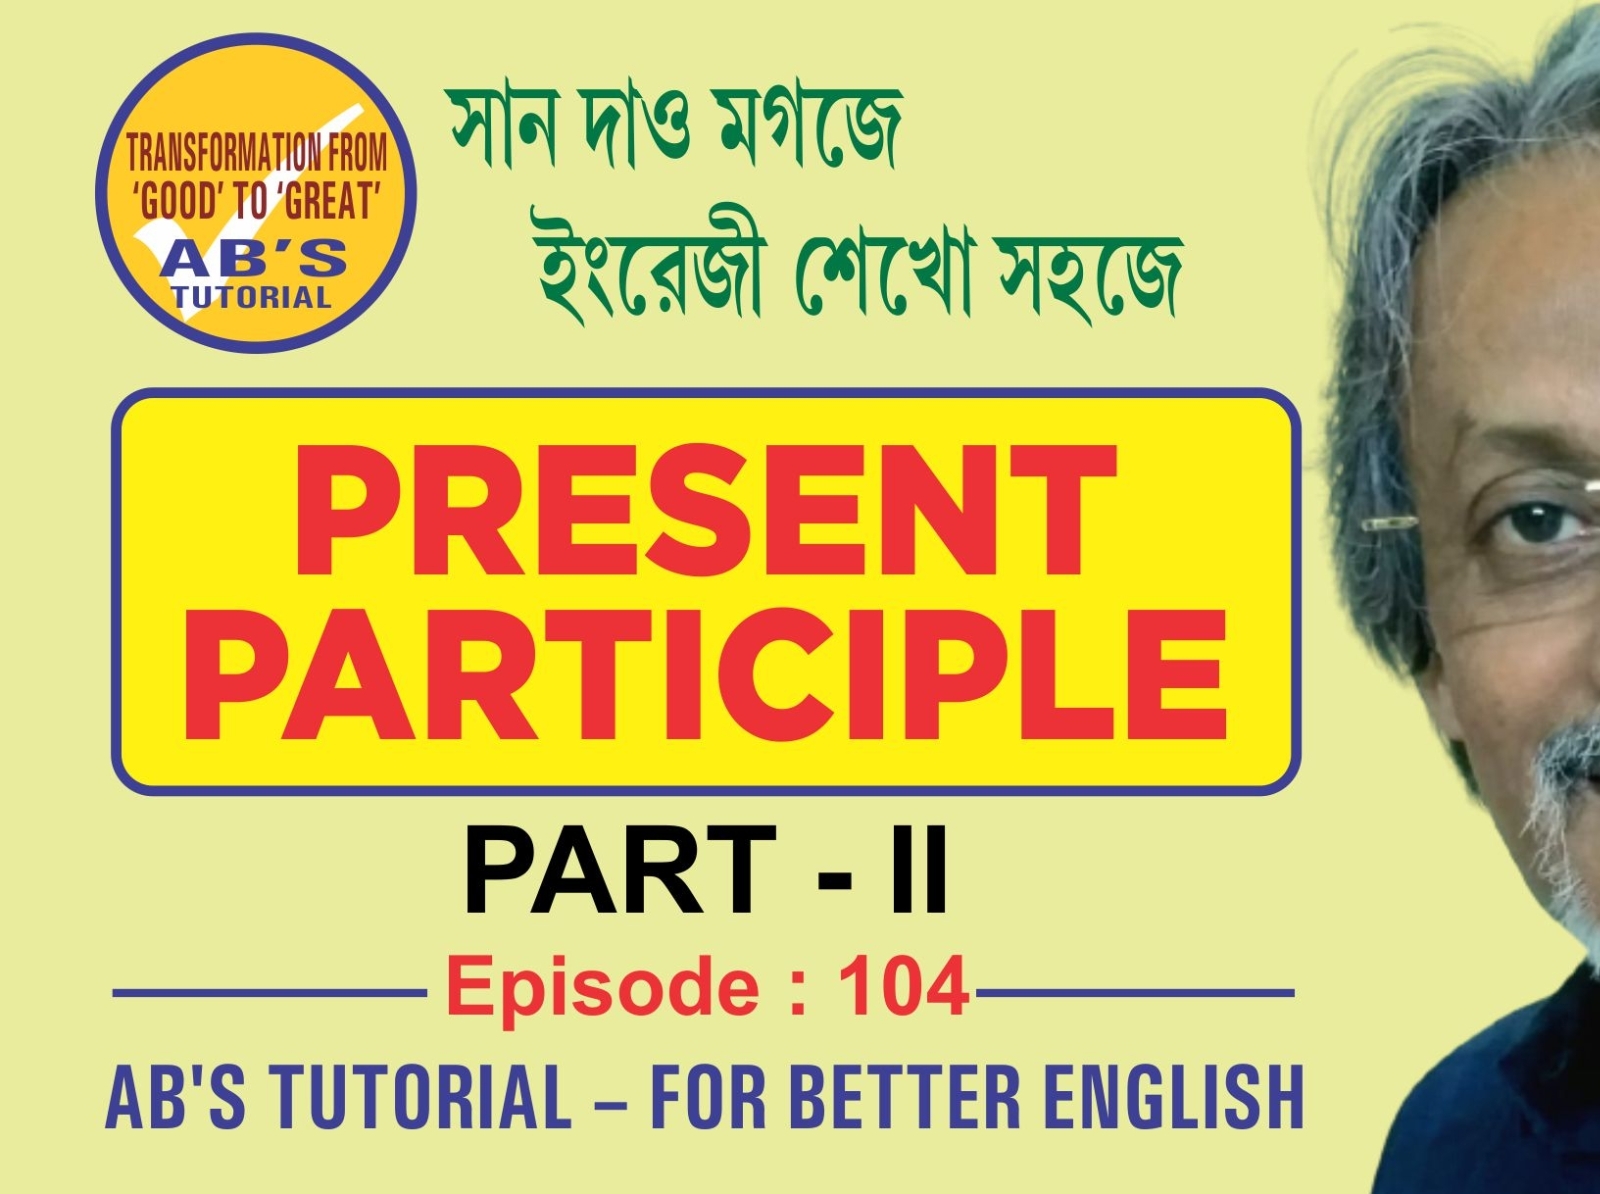 uses-of-present-participles-in-bengali-part-2-ab-s-tutorial-by-anup